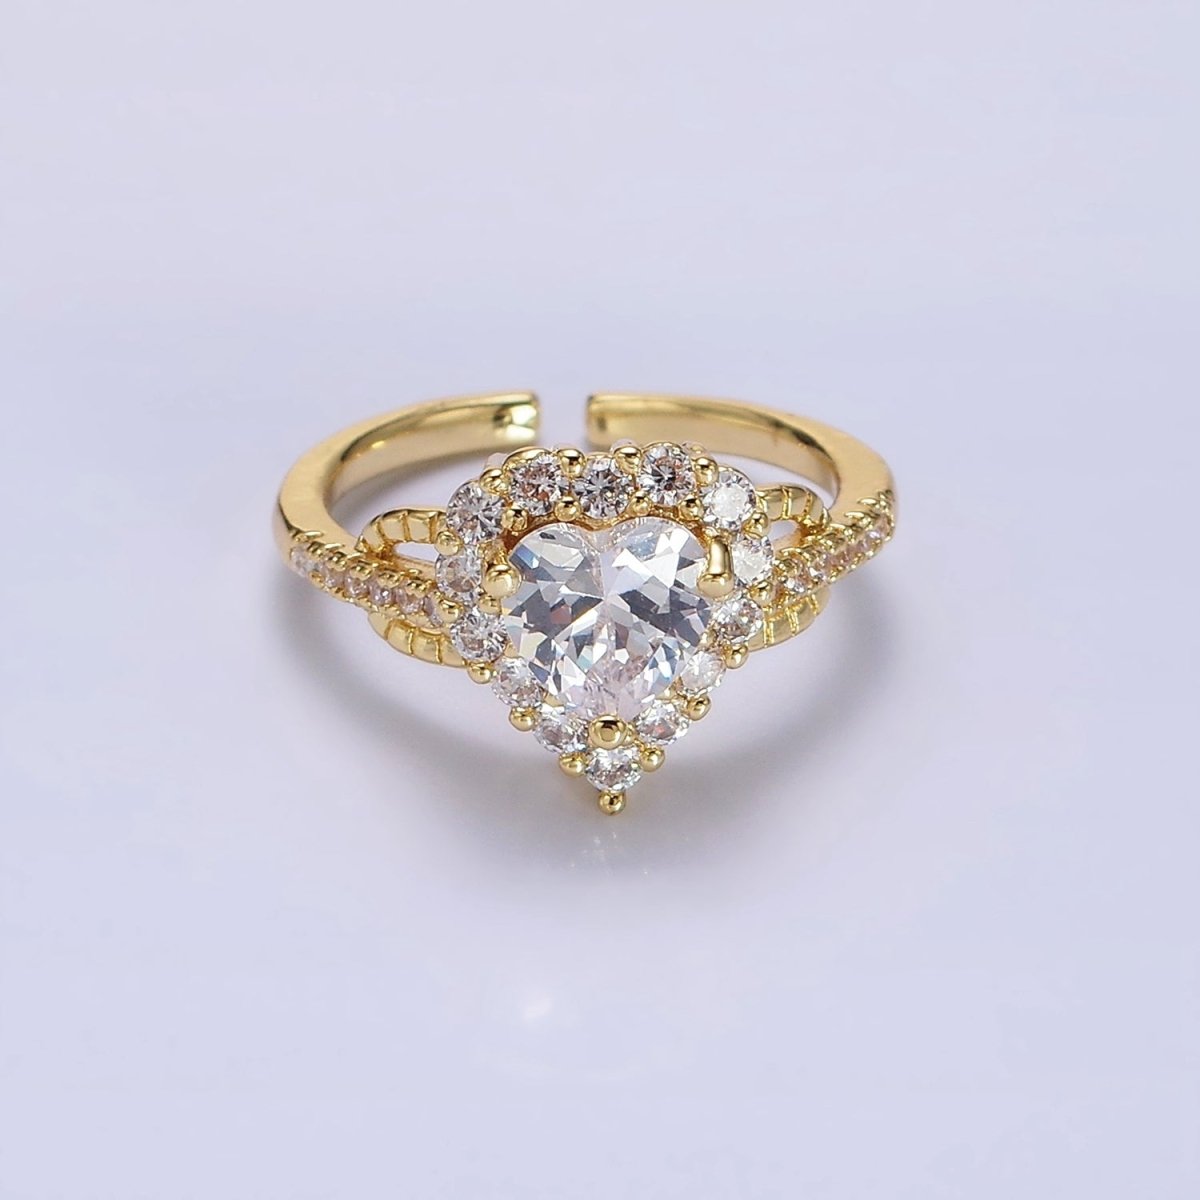 14K Gold Filled Purple, Clear CZ Heart Micro Paved Ring | O-592 O-593 - DLUXCA